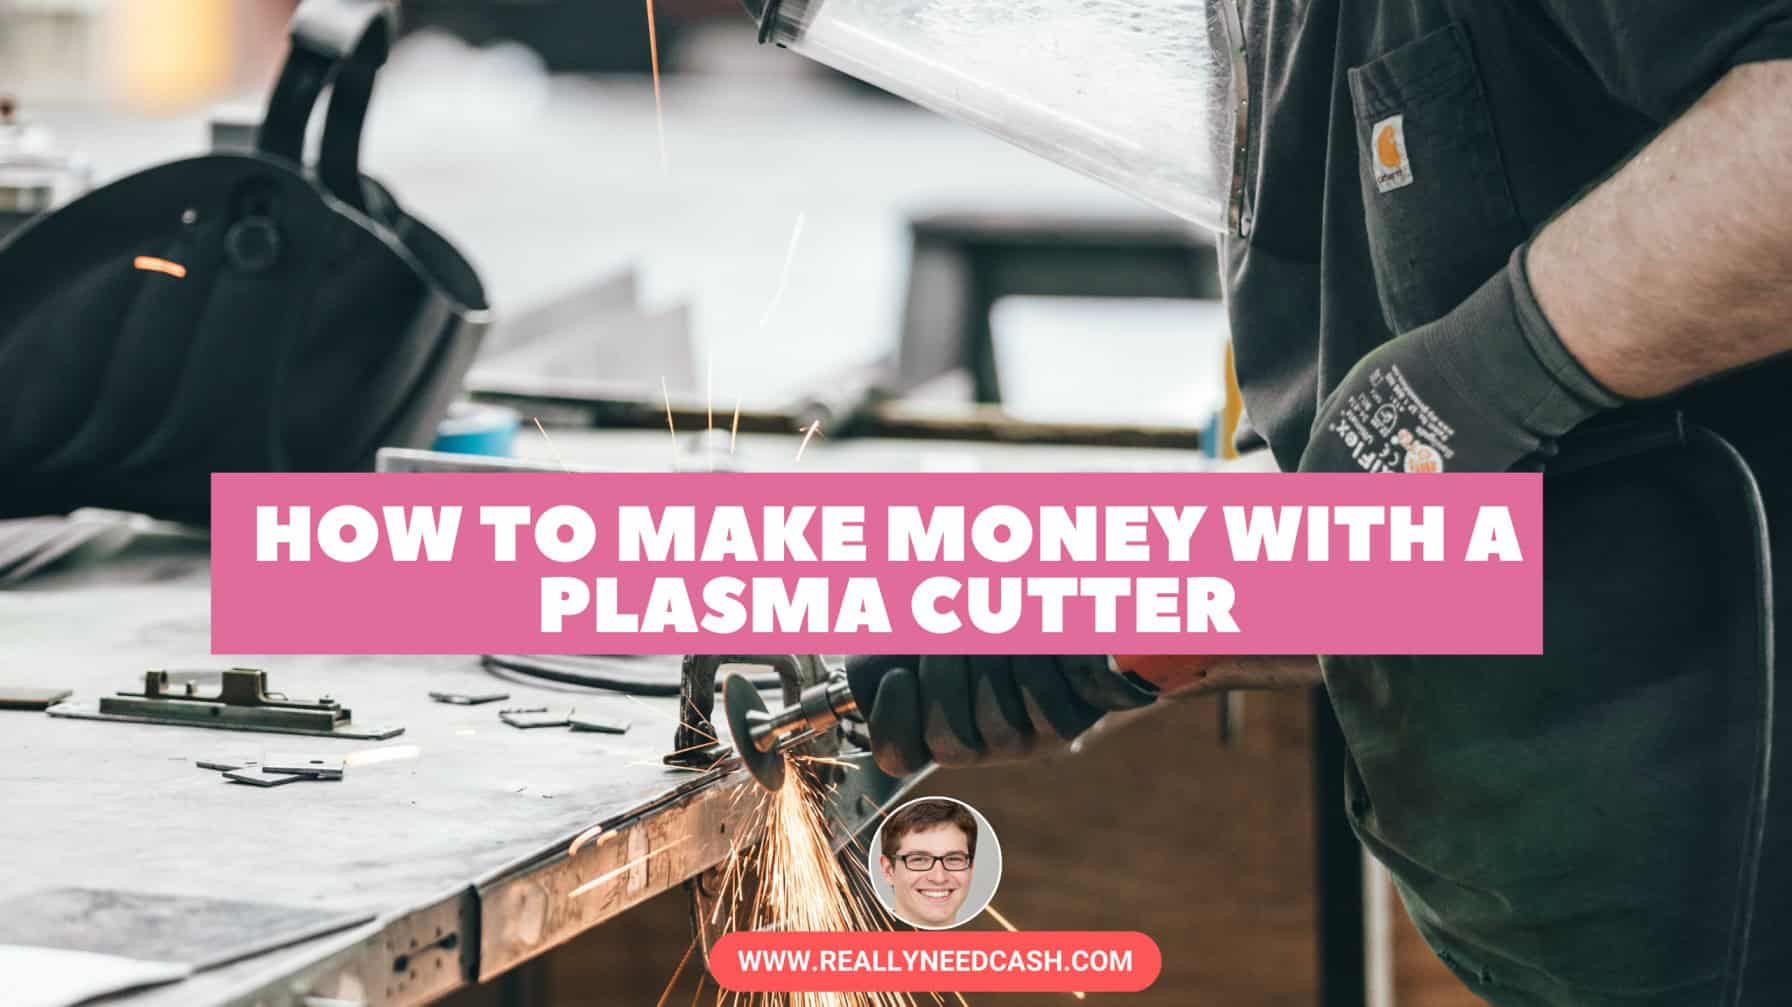 How to Make Money With a Plasma Cutter: Step-By-Step 2023 ✅